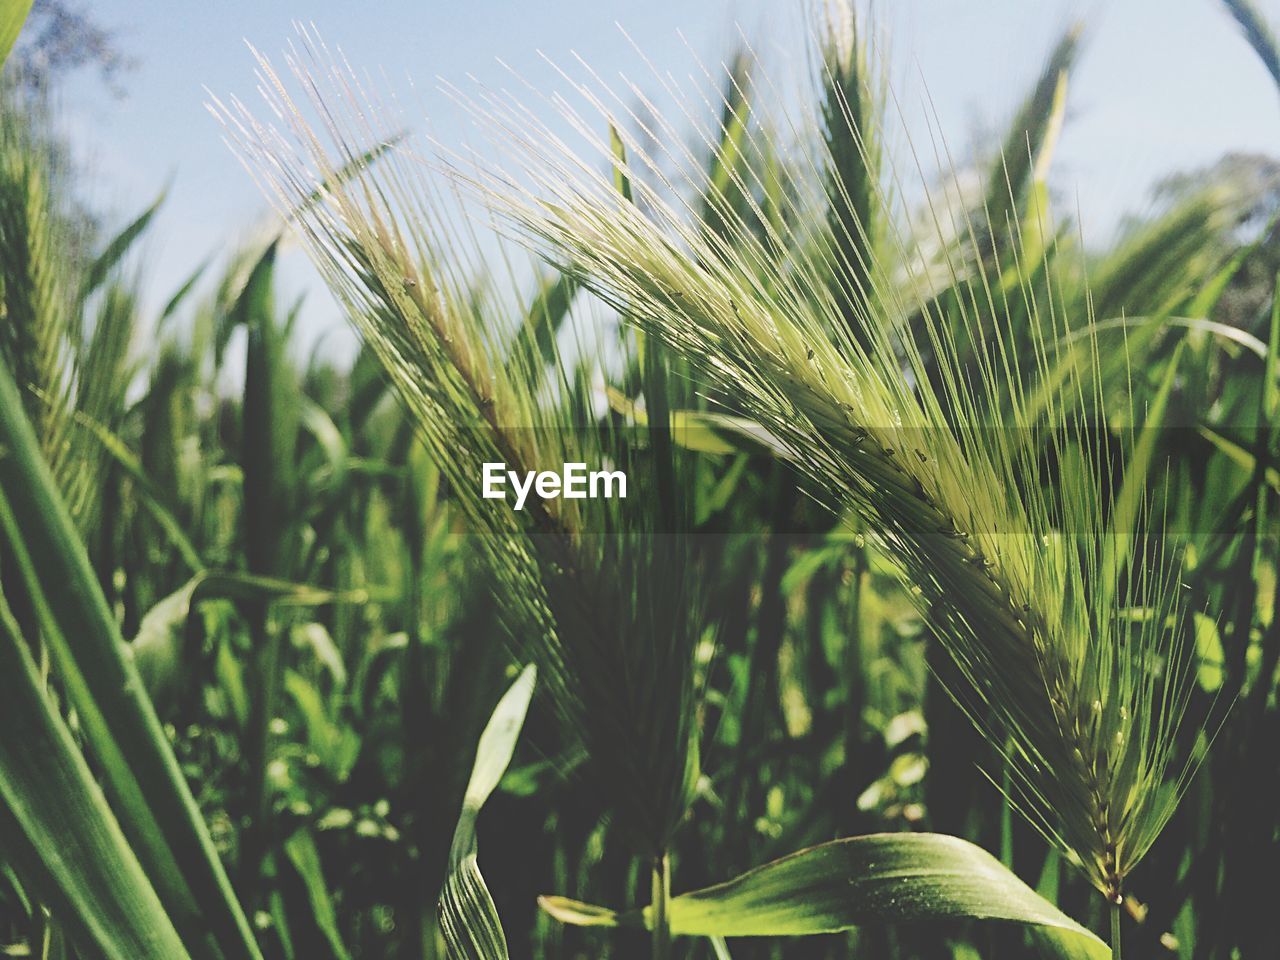 CLOSE-UP OF WHEAT GROWING ON FARM